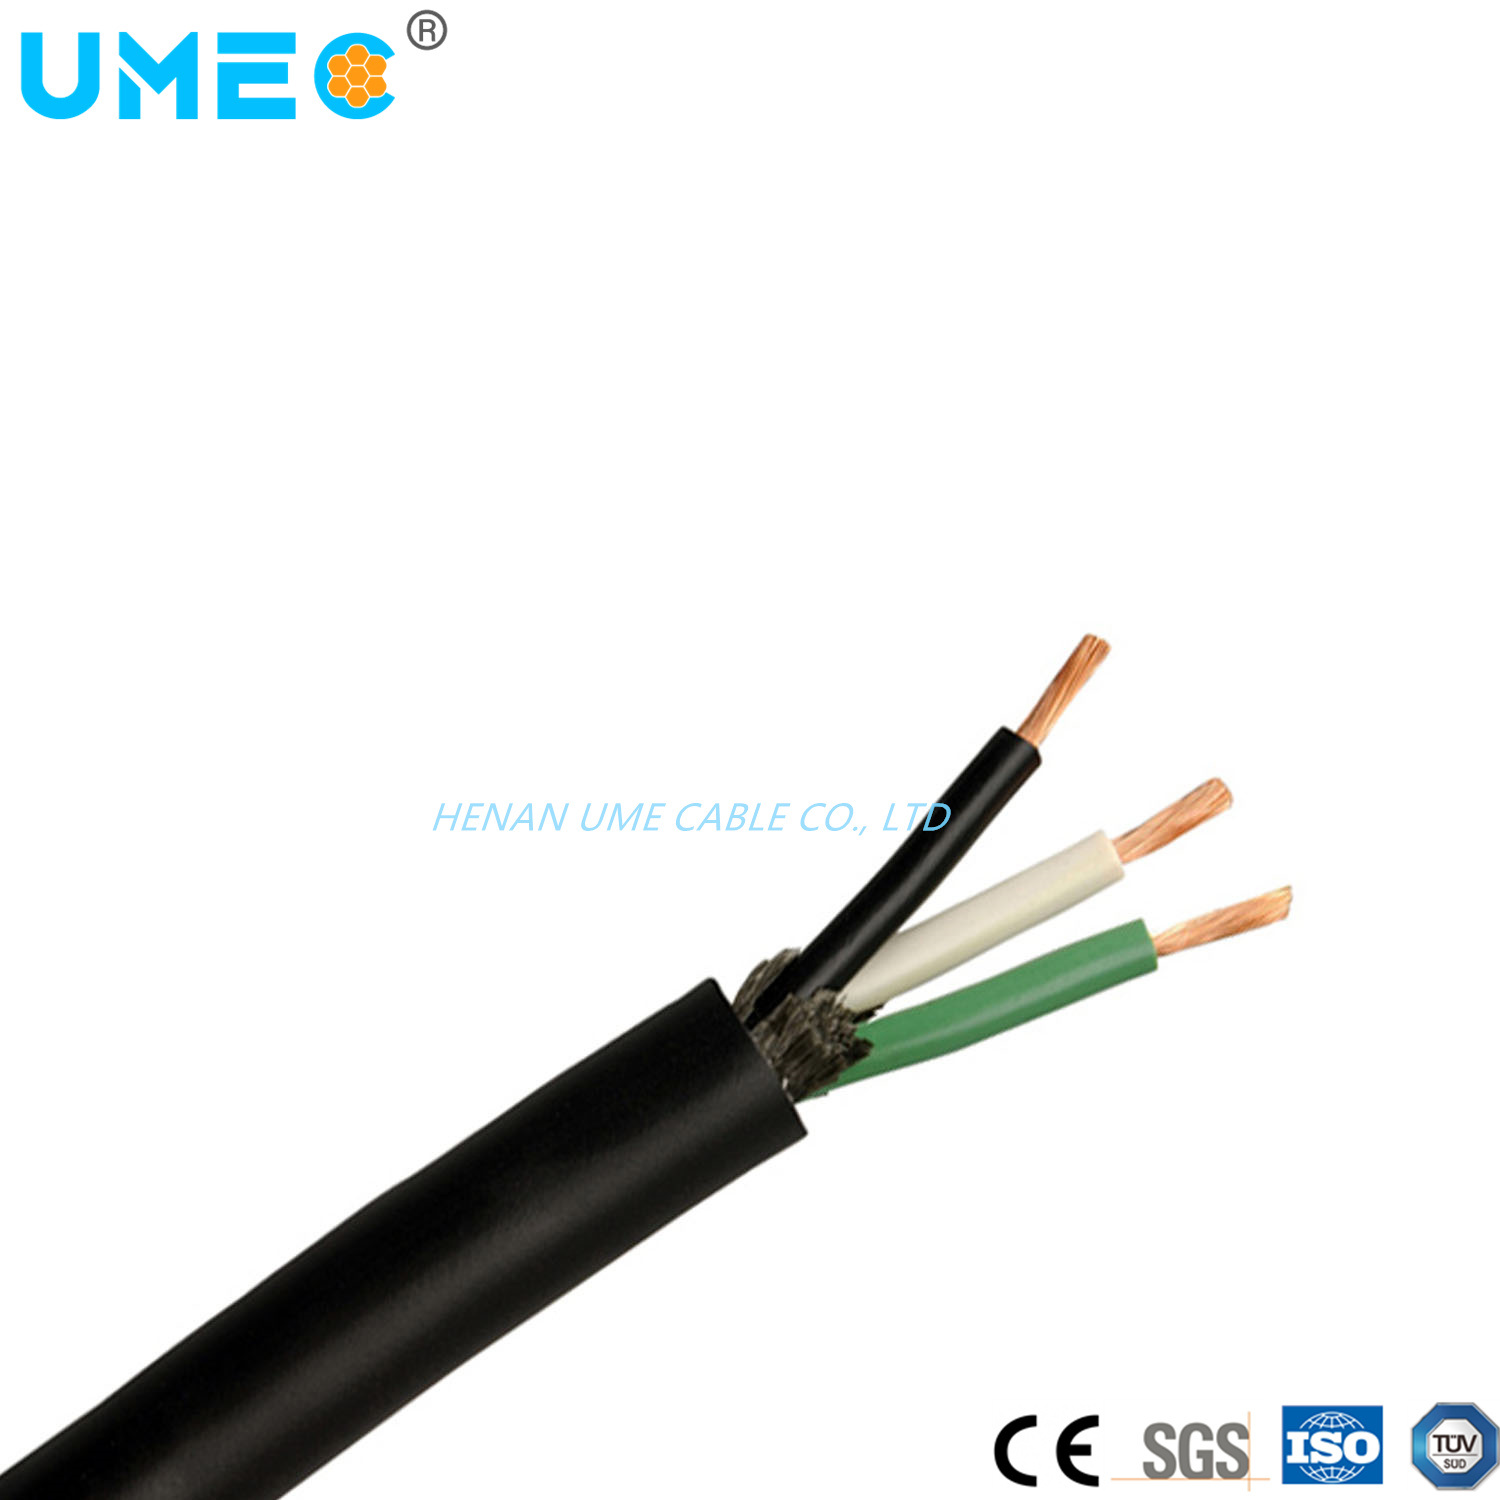 
                China Factory 2/3/4cx2.5sq/4sq/6sqmm Soow Sow So Epr CPE Rubber Flexible Electric Cable Price
            